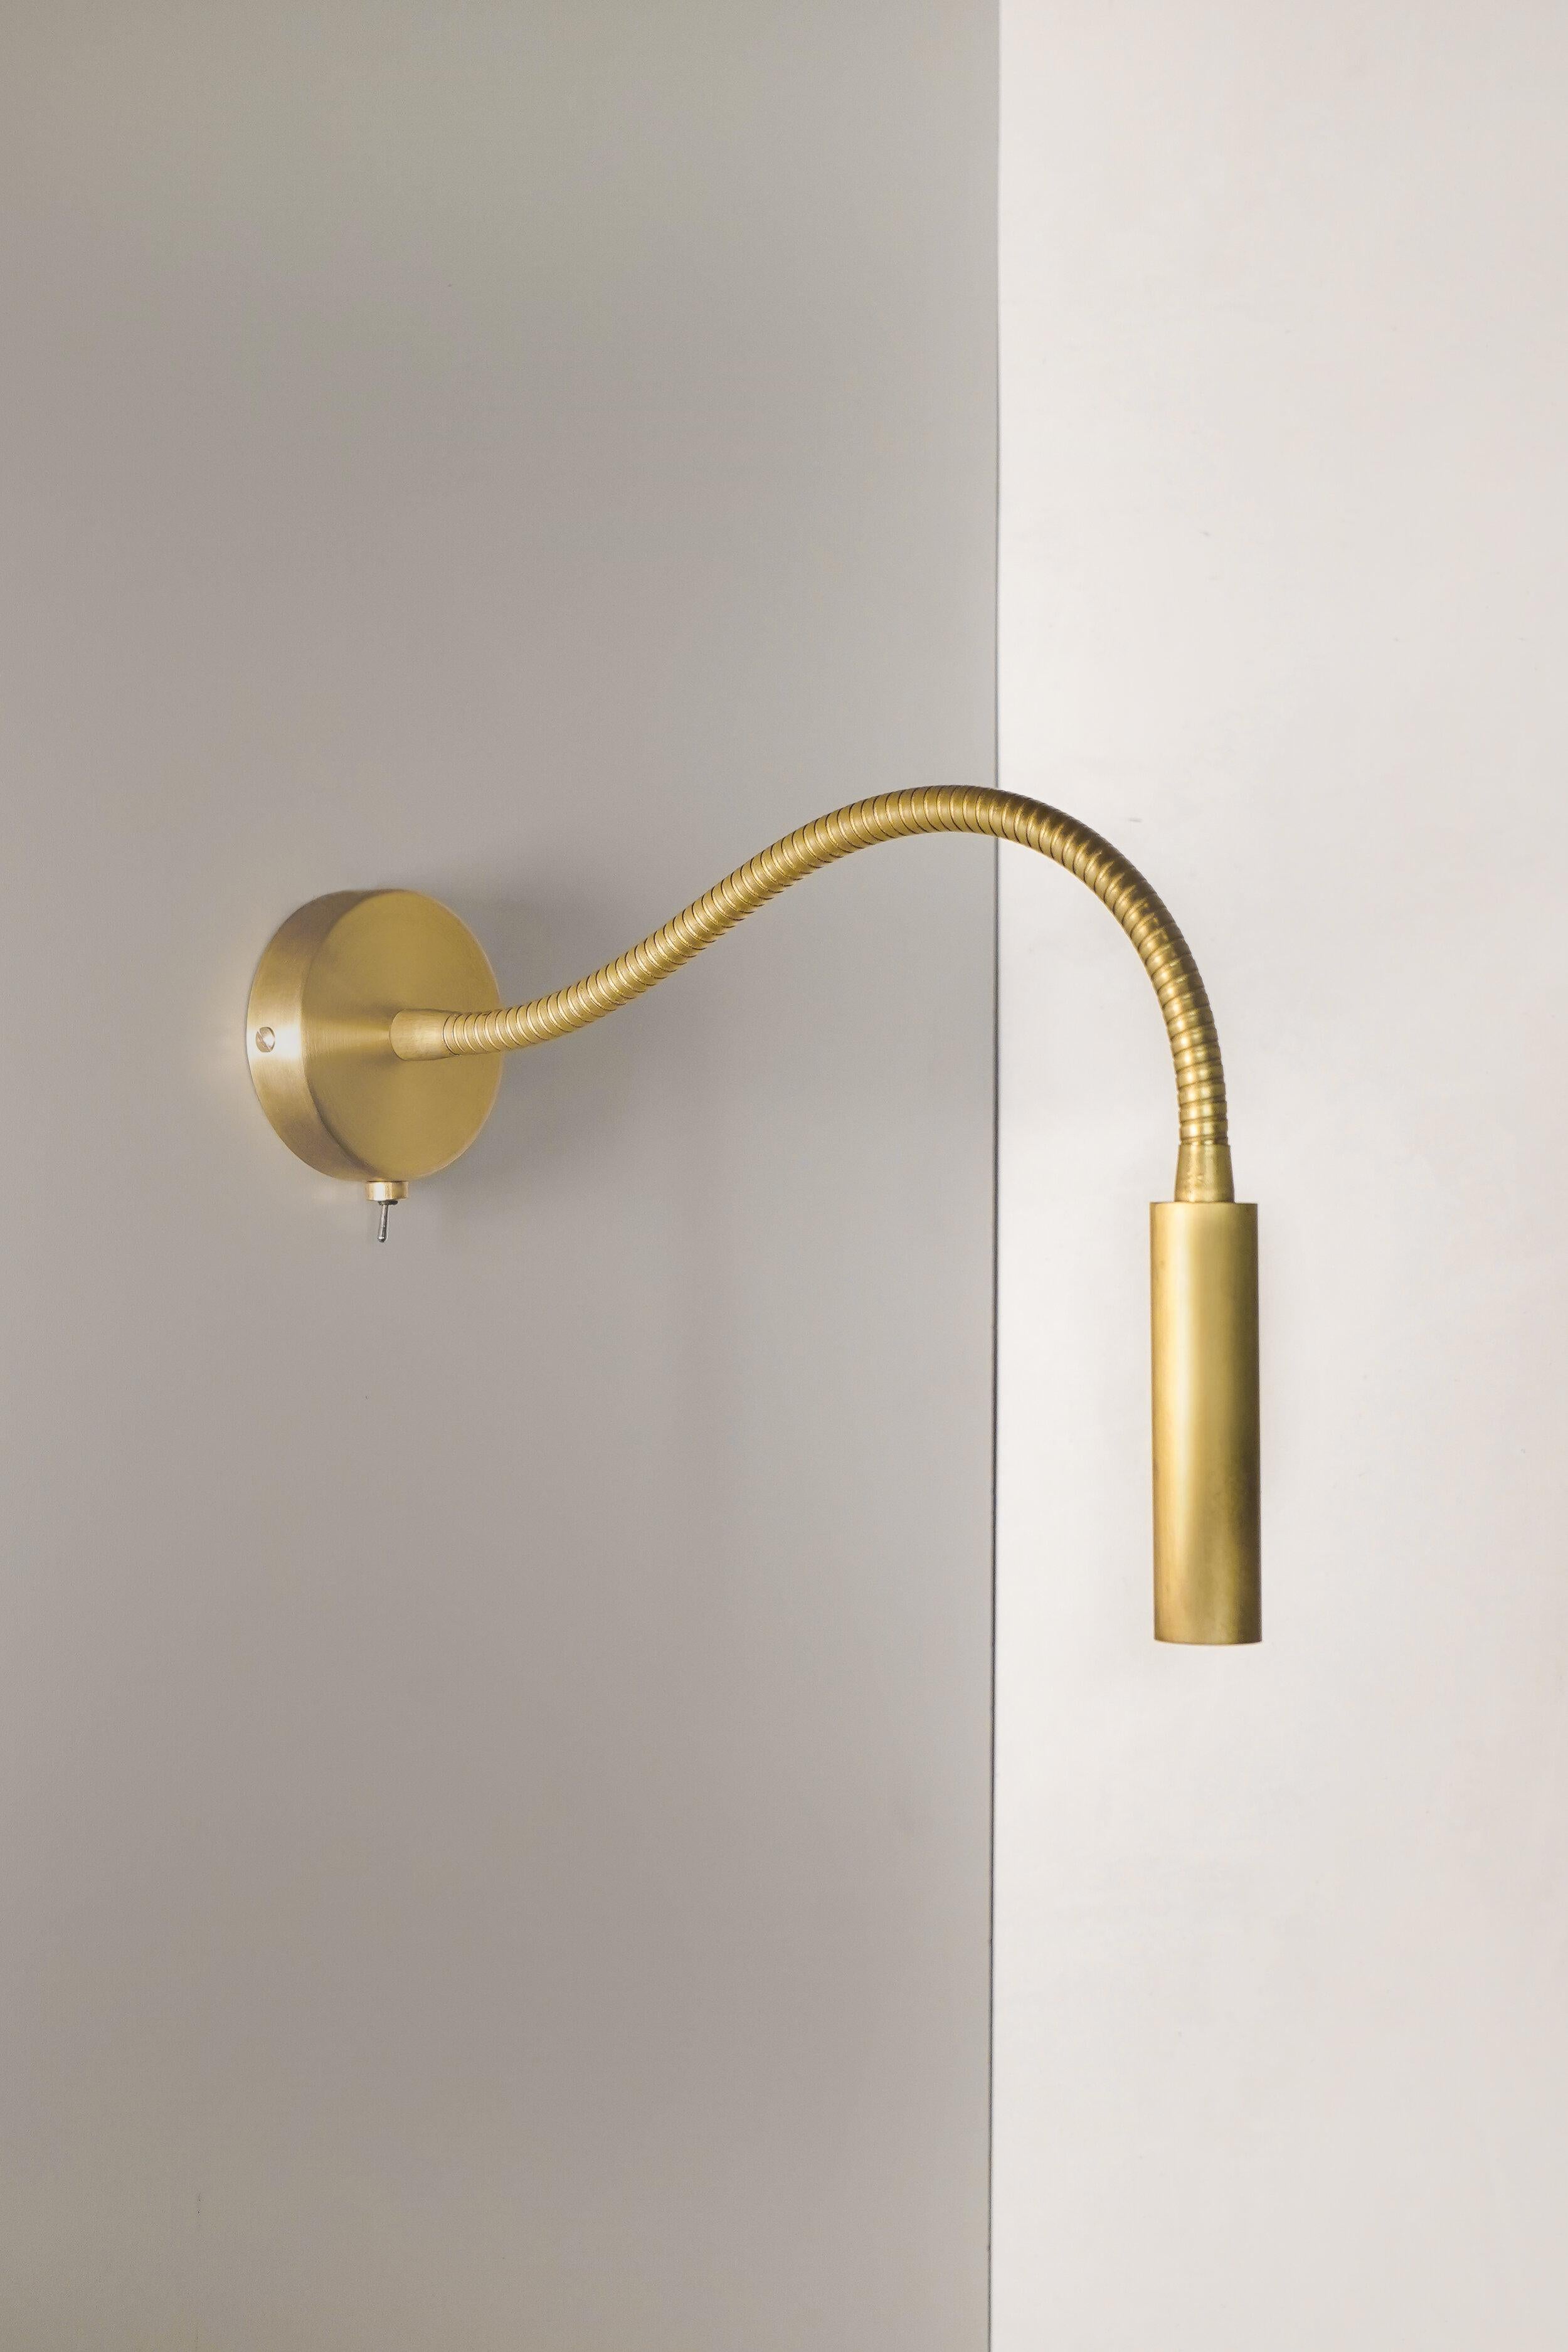 Book Flexo switch wall light by Contain
Dimensions: D 2.5 x W 8 x H 46.5 cm (standard length)
Materials: Brass.
Available in different finishes.

All our lamps can be wired according to each country. If sold to the USA it will be wired for the USA